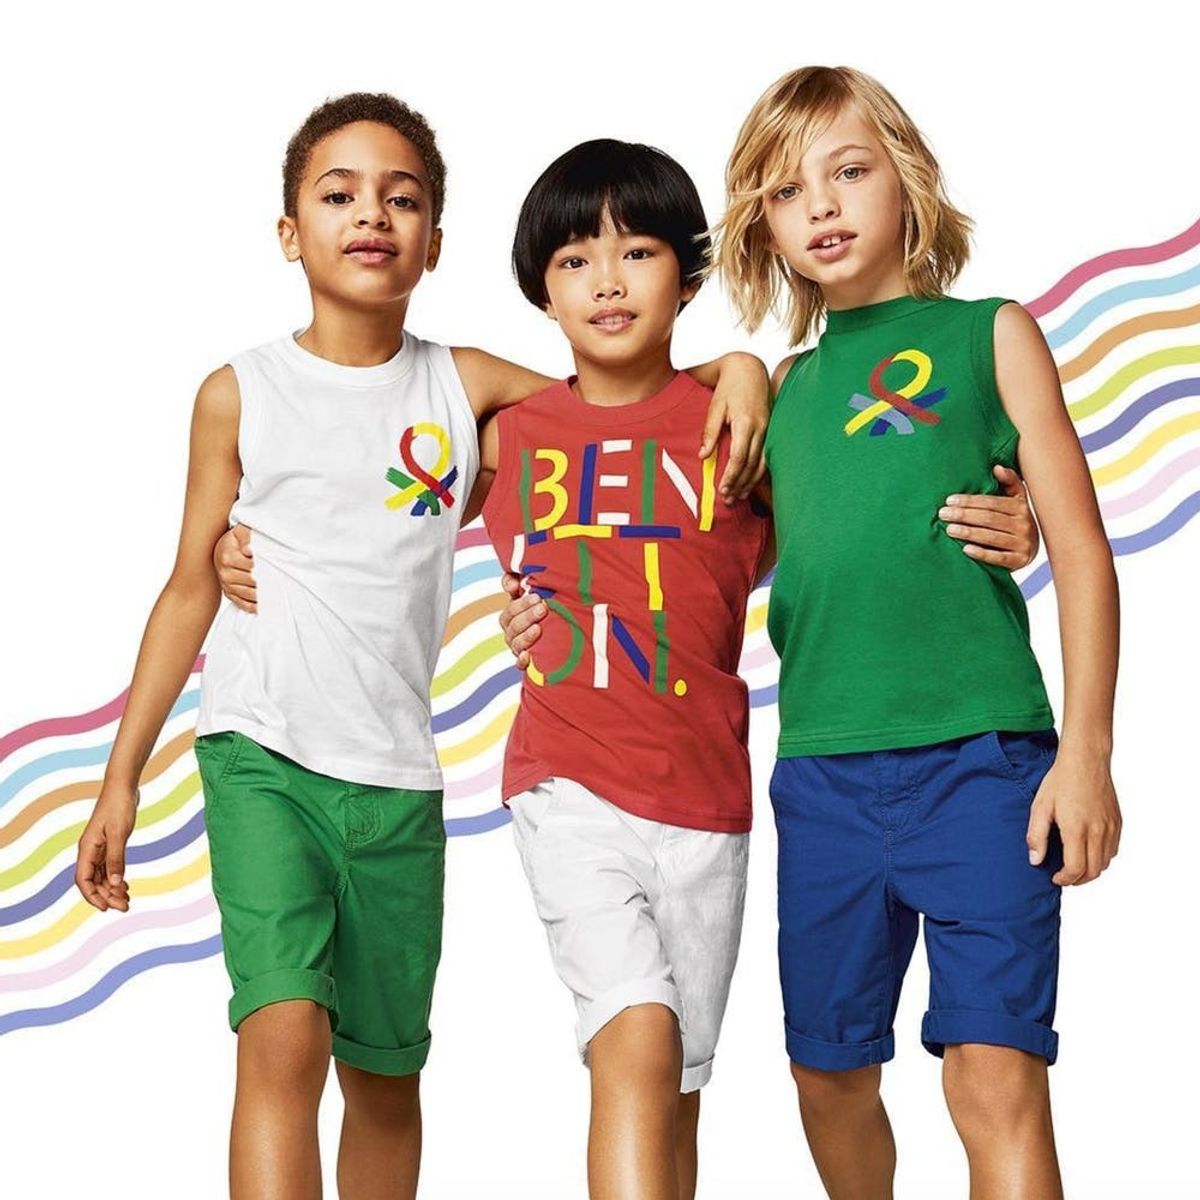 Benetton’s “No Girls Allowed” Comment Has the Internet Seriously Angry